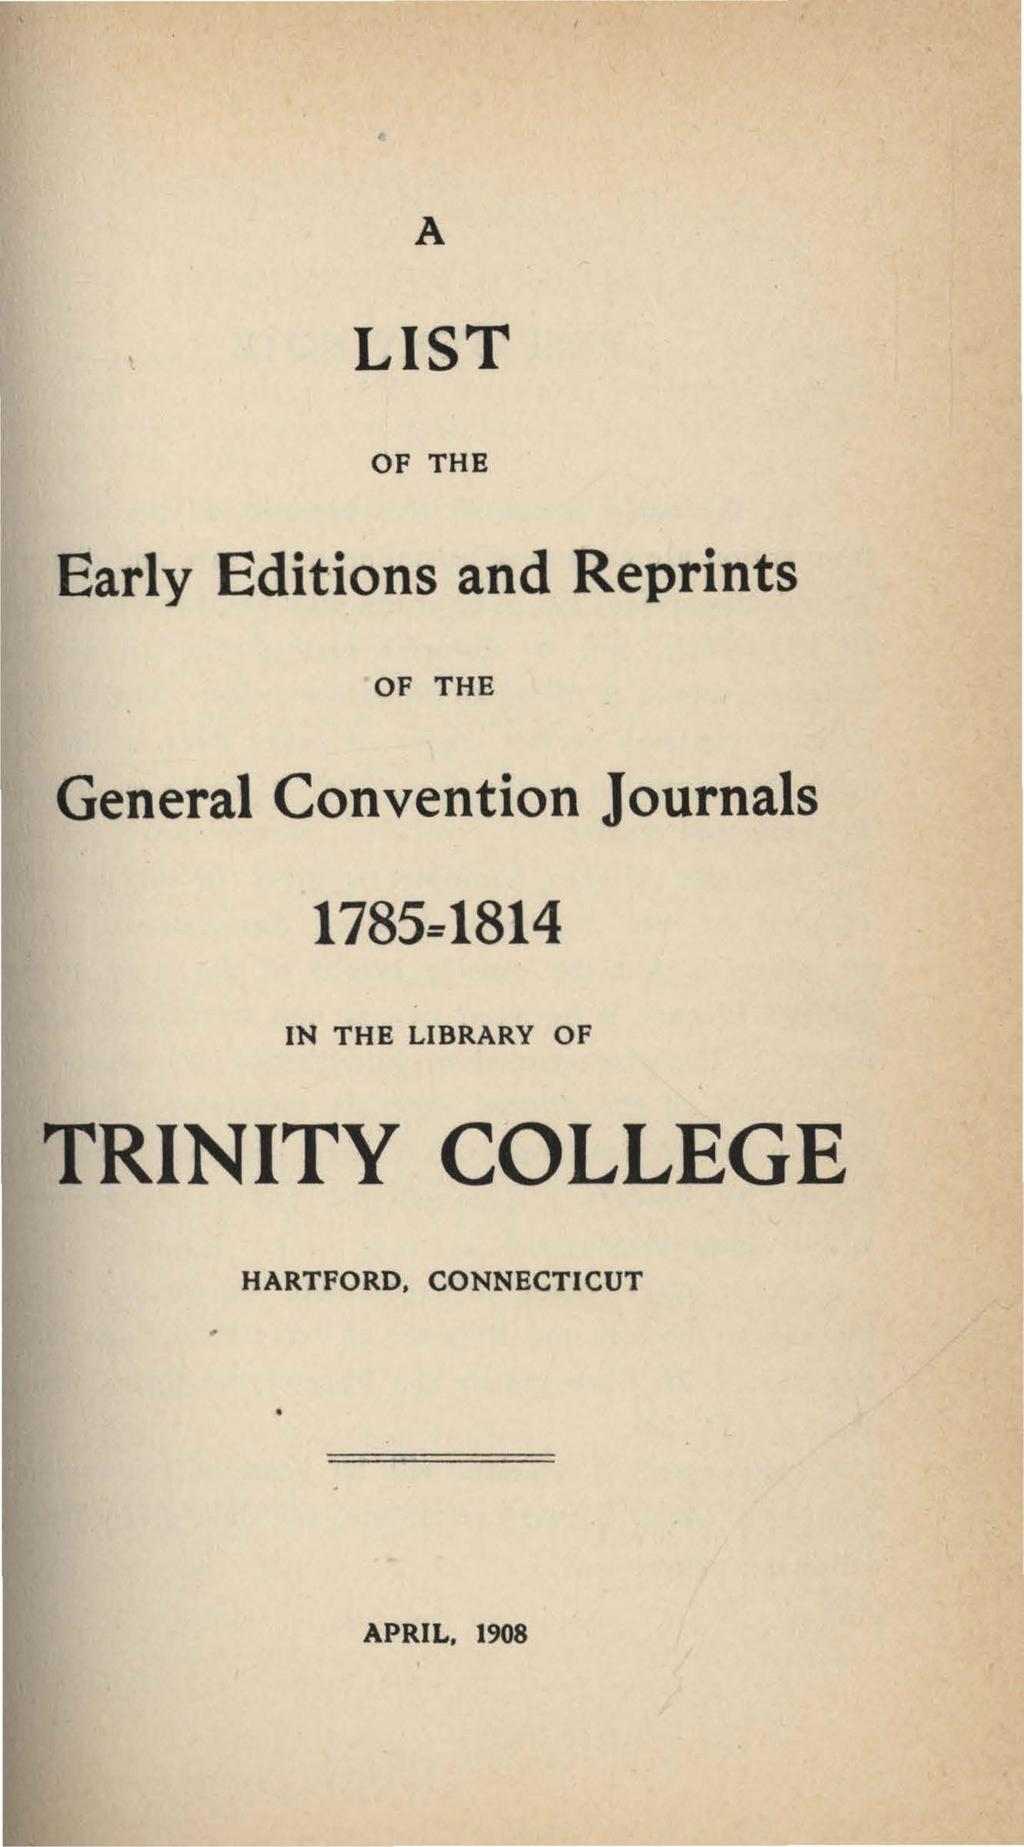 A LIST OF THE Early Editions and Reprints OF THE General Convention Journals